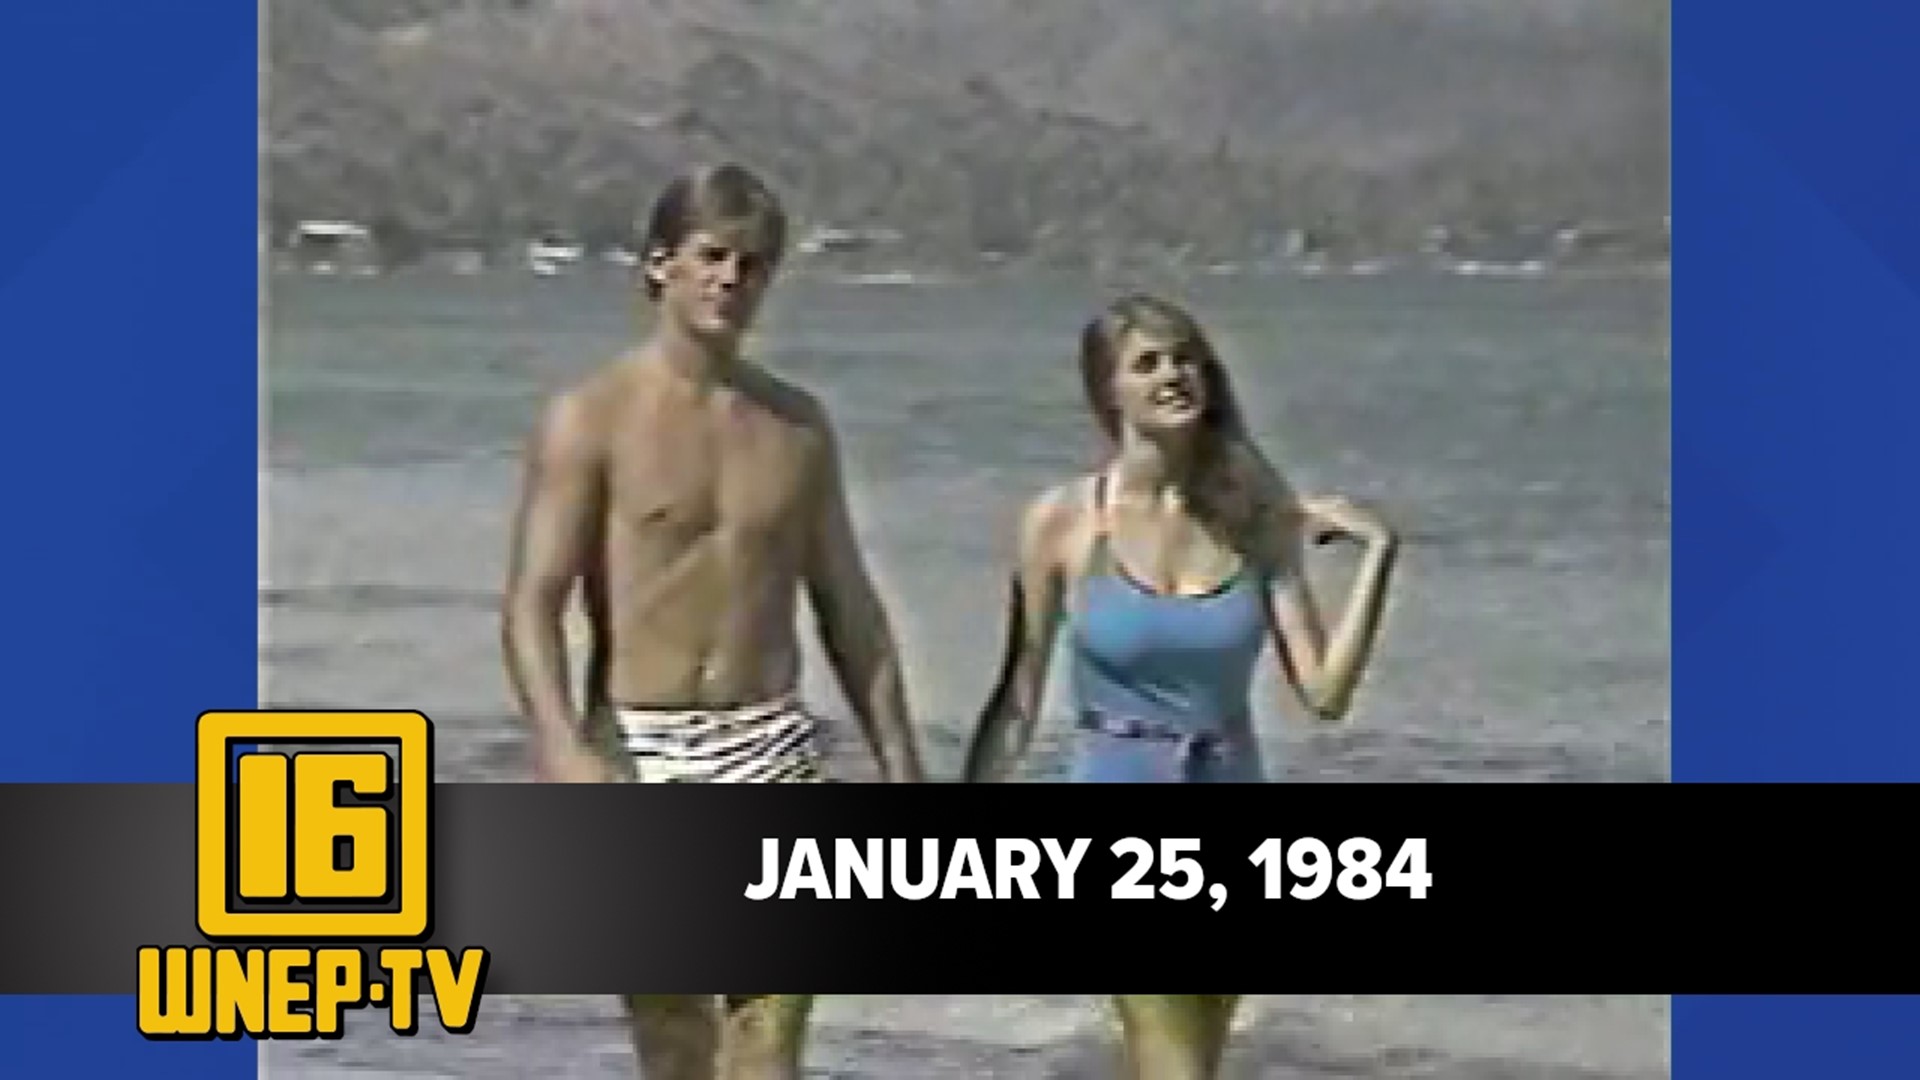 Join Karen Harch and Nolan Johannes with curated stories from January 25, 1984.